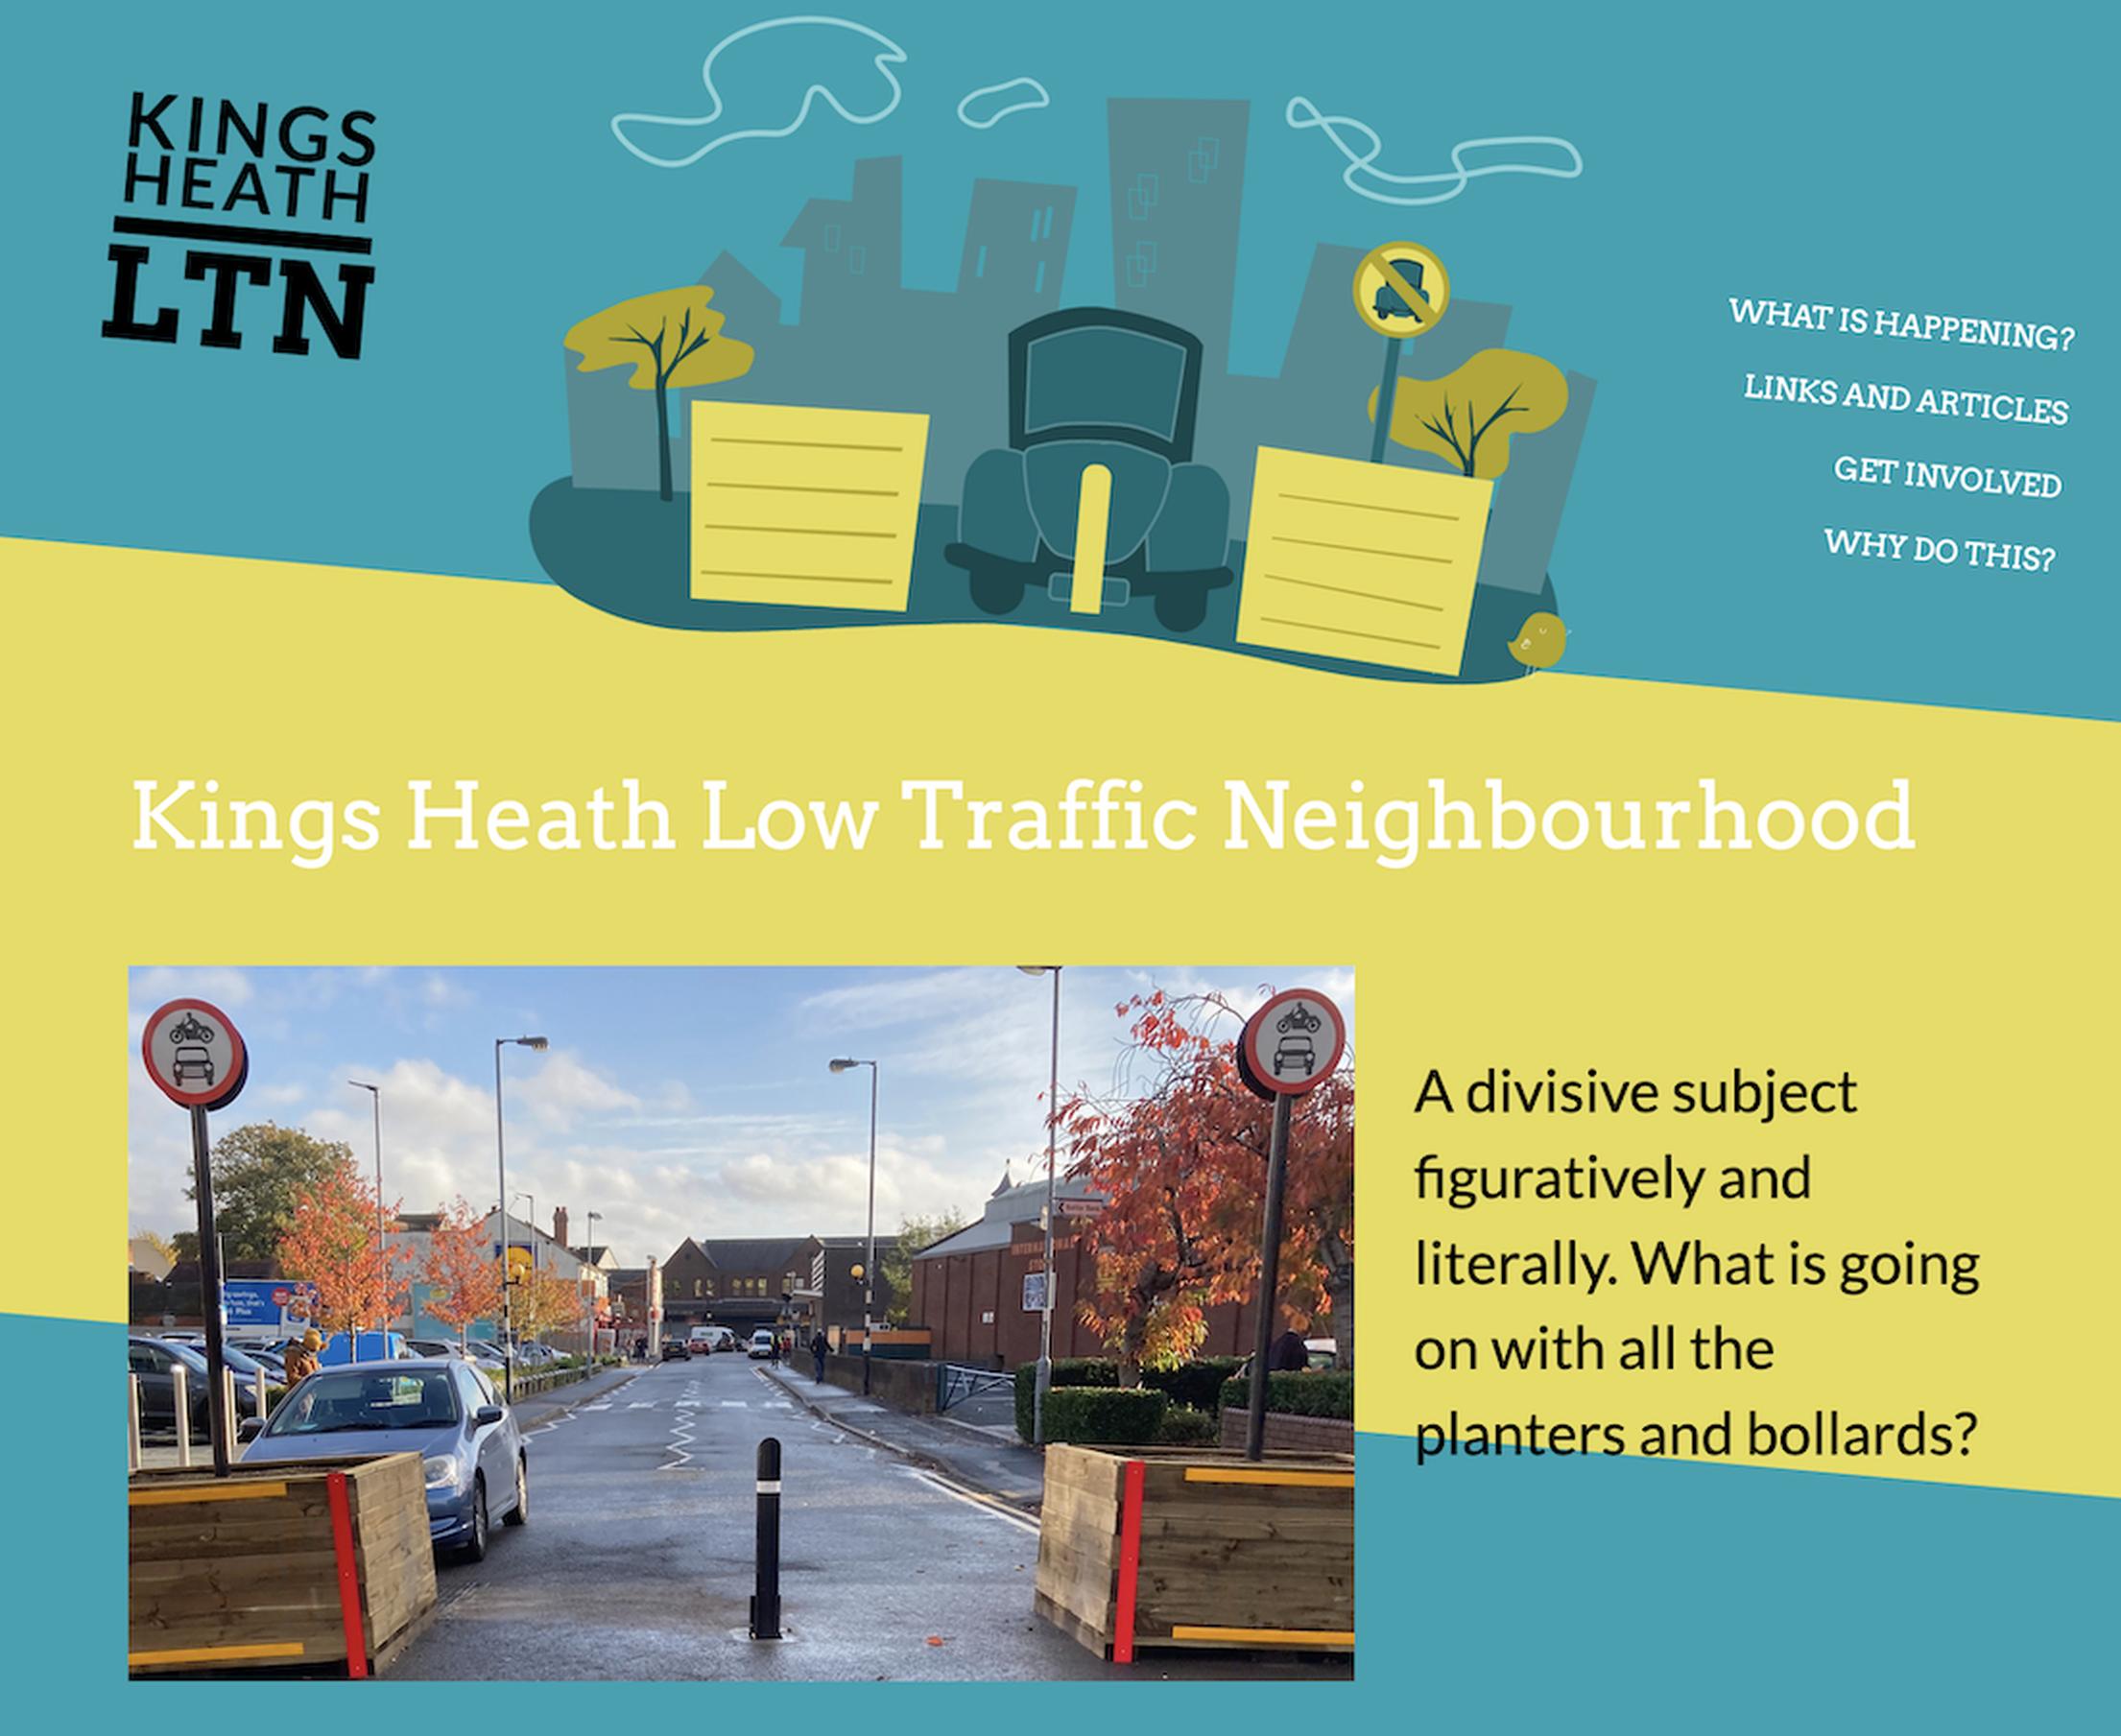 LTNs have been the subject of much debate and inspired local websites such as www.kingsheathltn.co.uk